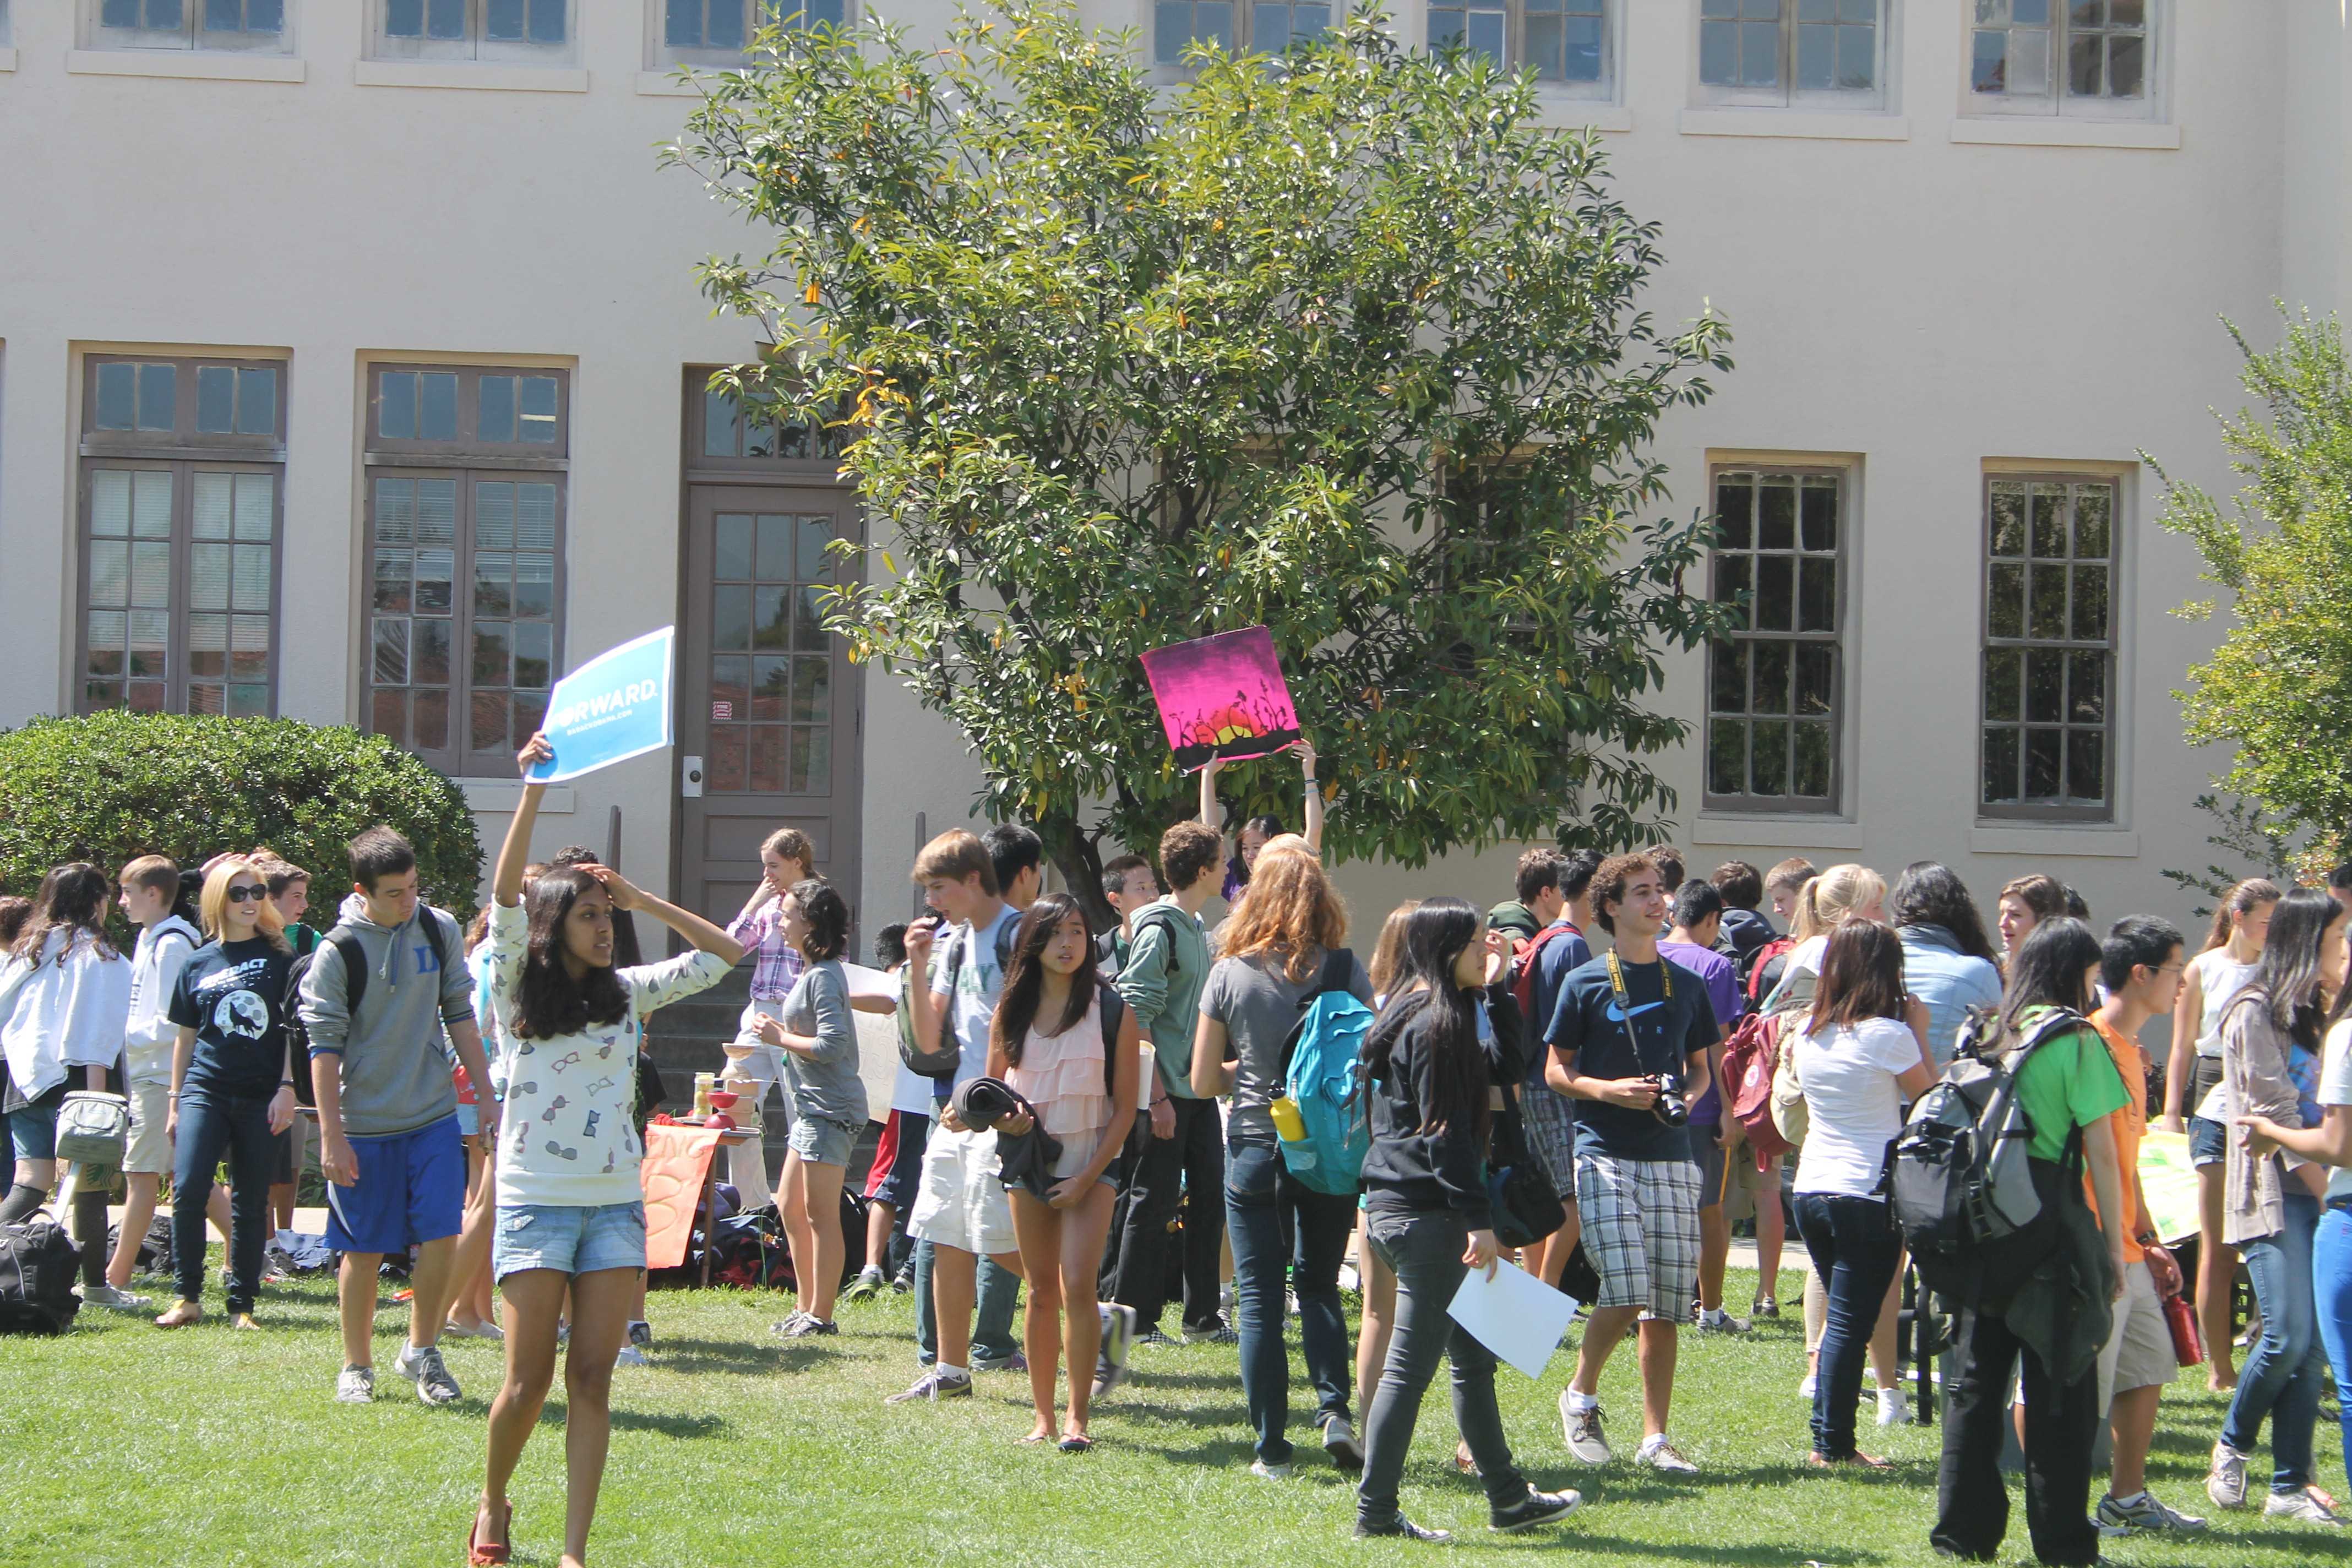 Students advertise for their clubs during the extended lunch. Over 55 different organizations brought signs and displays to attract student to join their clubs last year.